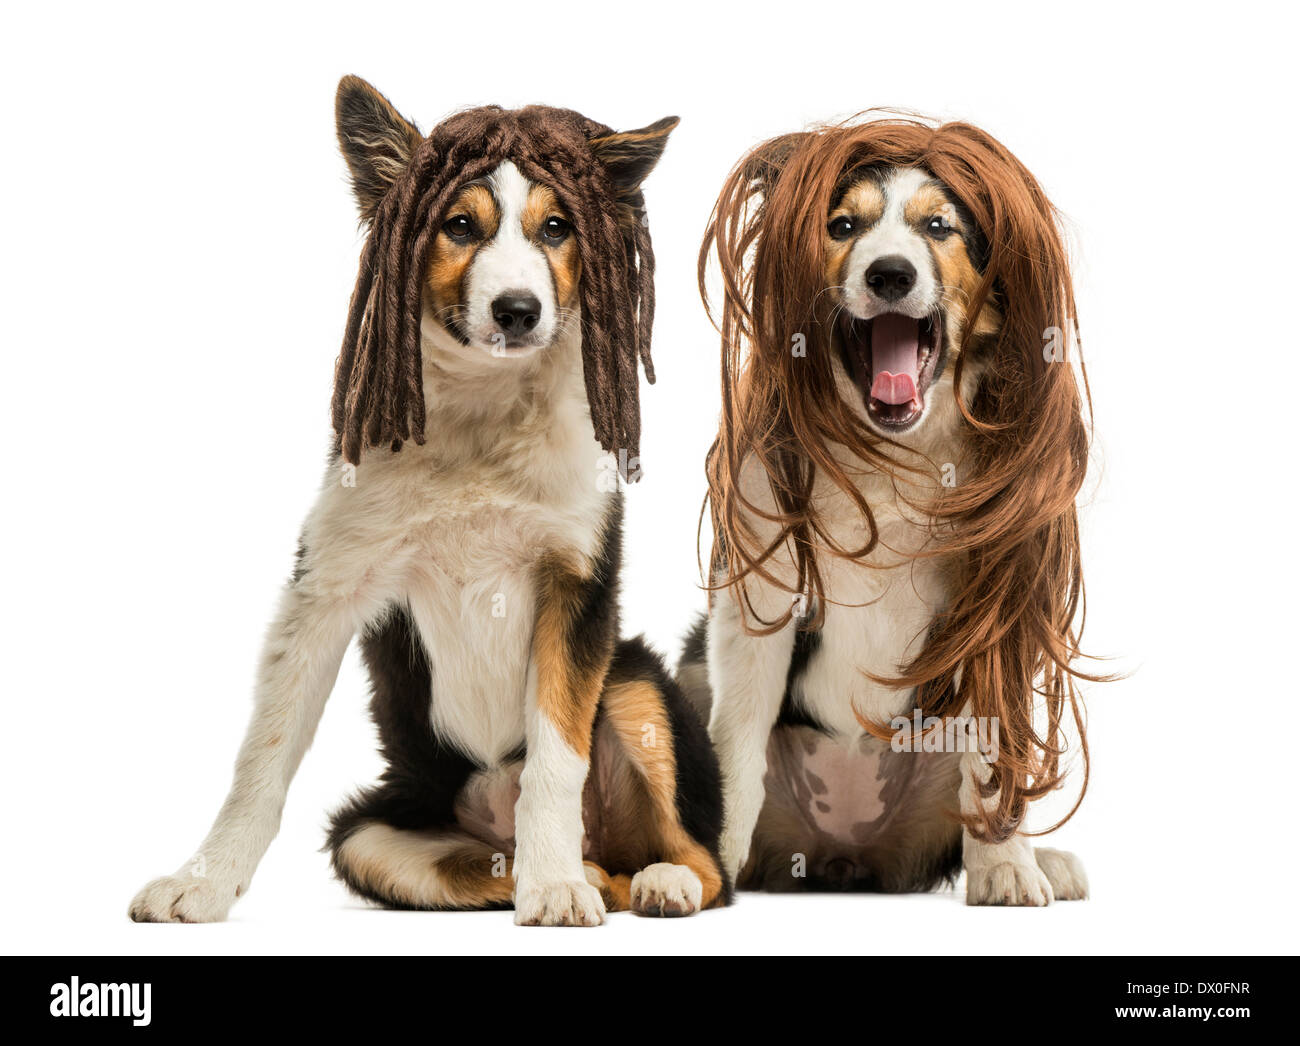 Border Collies wearing wigs sitting together, against white background Stock Photo